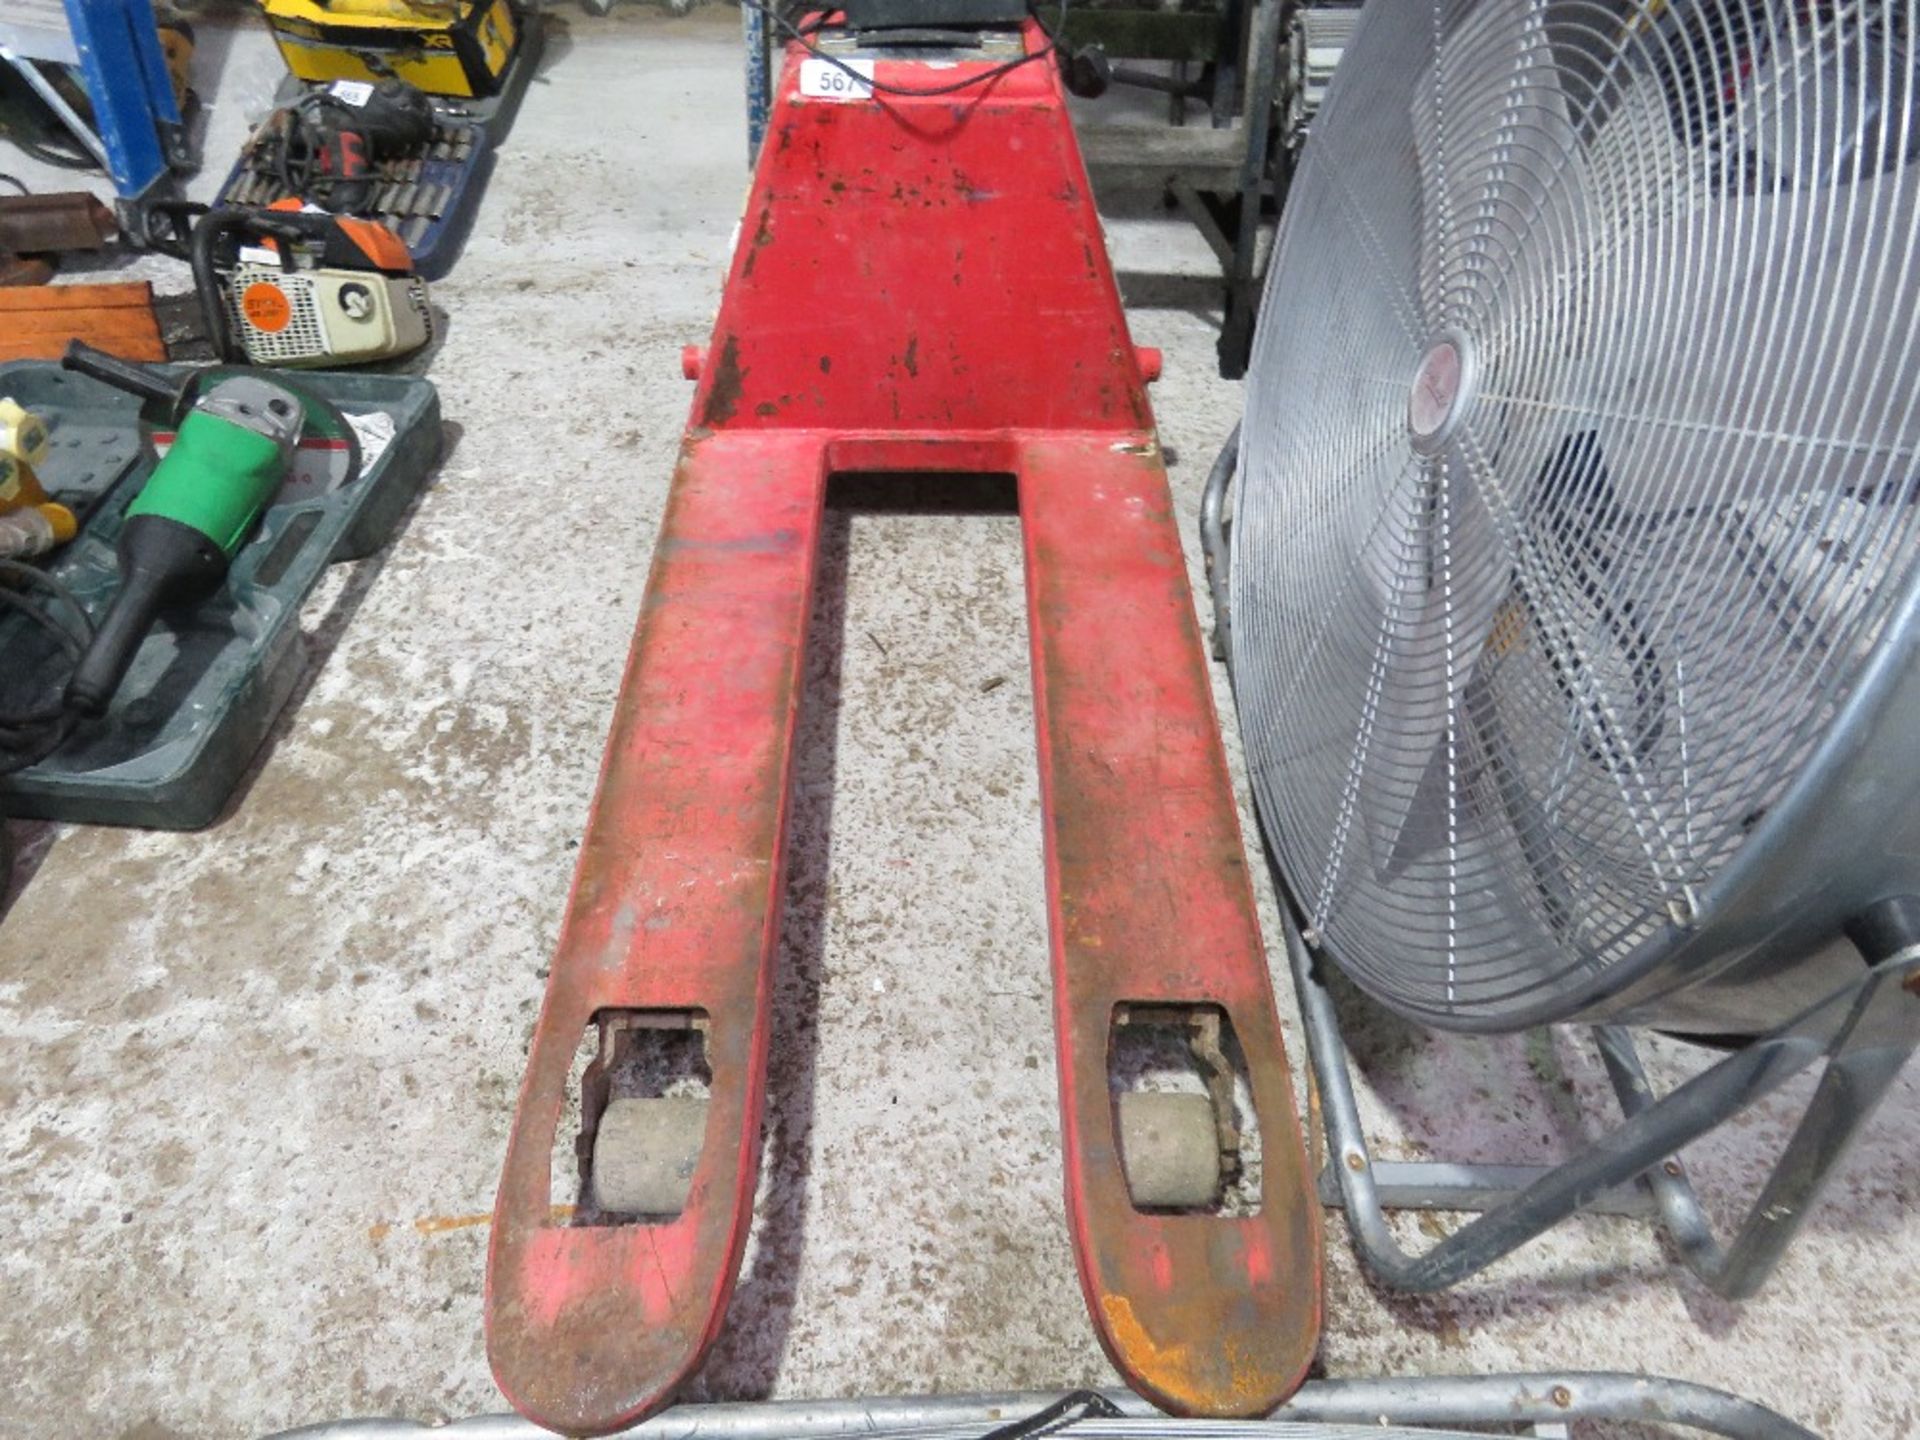 BATTERY POWERED PALLET TRUCK. WHEN TESTED WAS SEEN TO LIFT, LOWER AND DRIVE. WITH A CHARGER. - Image 6 of 6